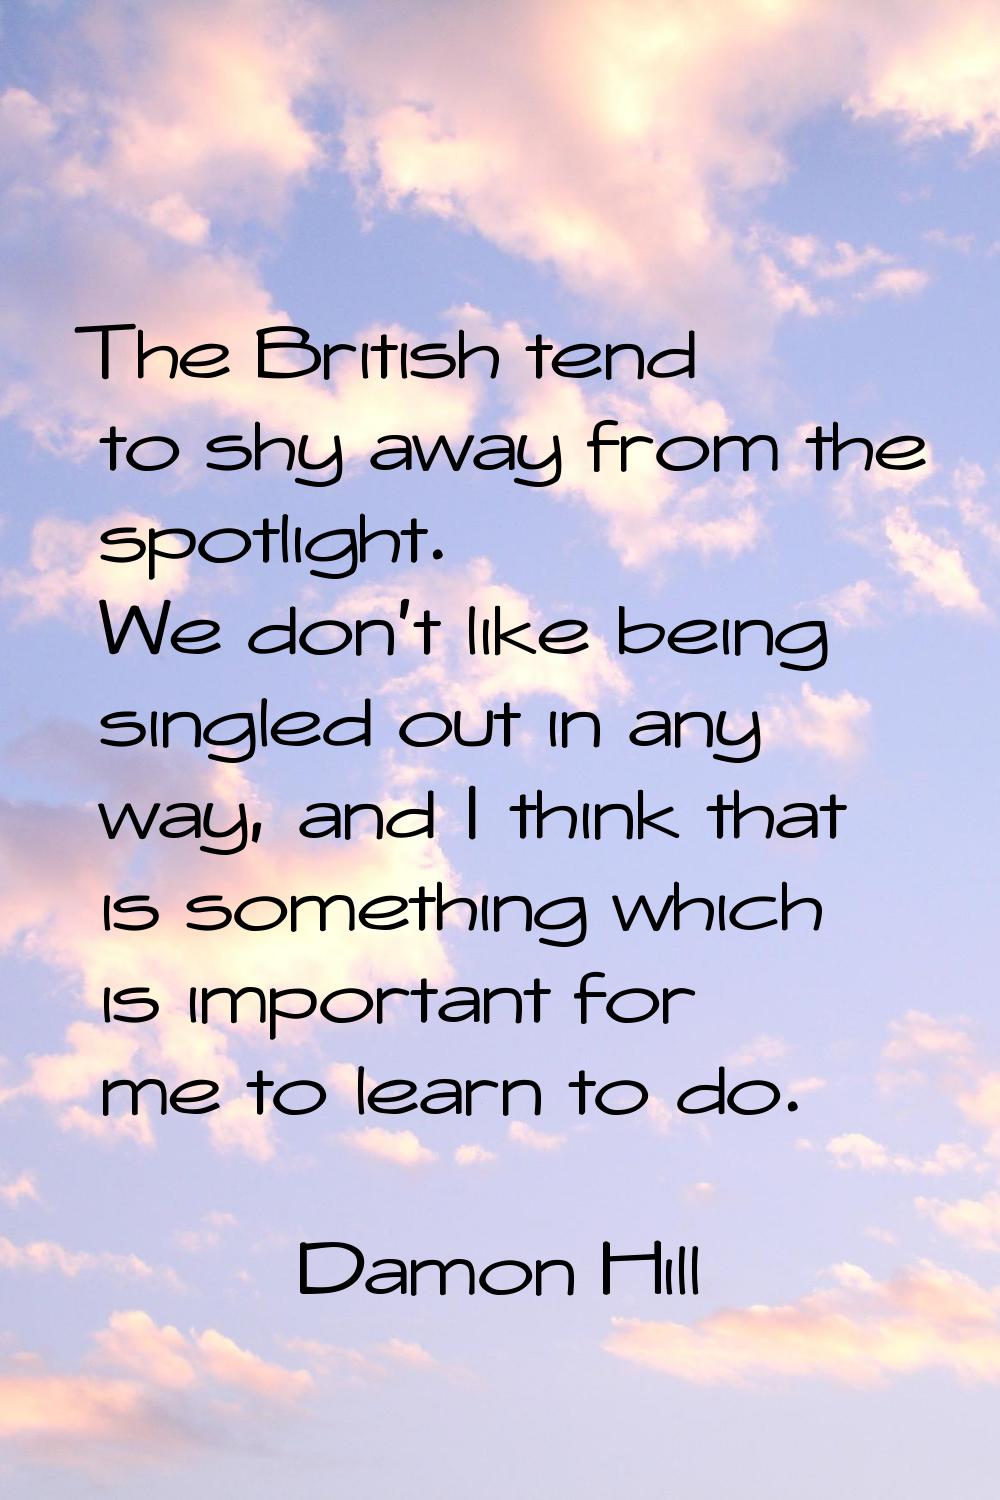 The British tend to shy away from the spotlight. We don't like being singled out in any way, and I 